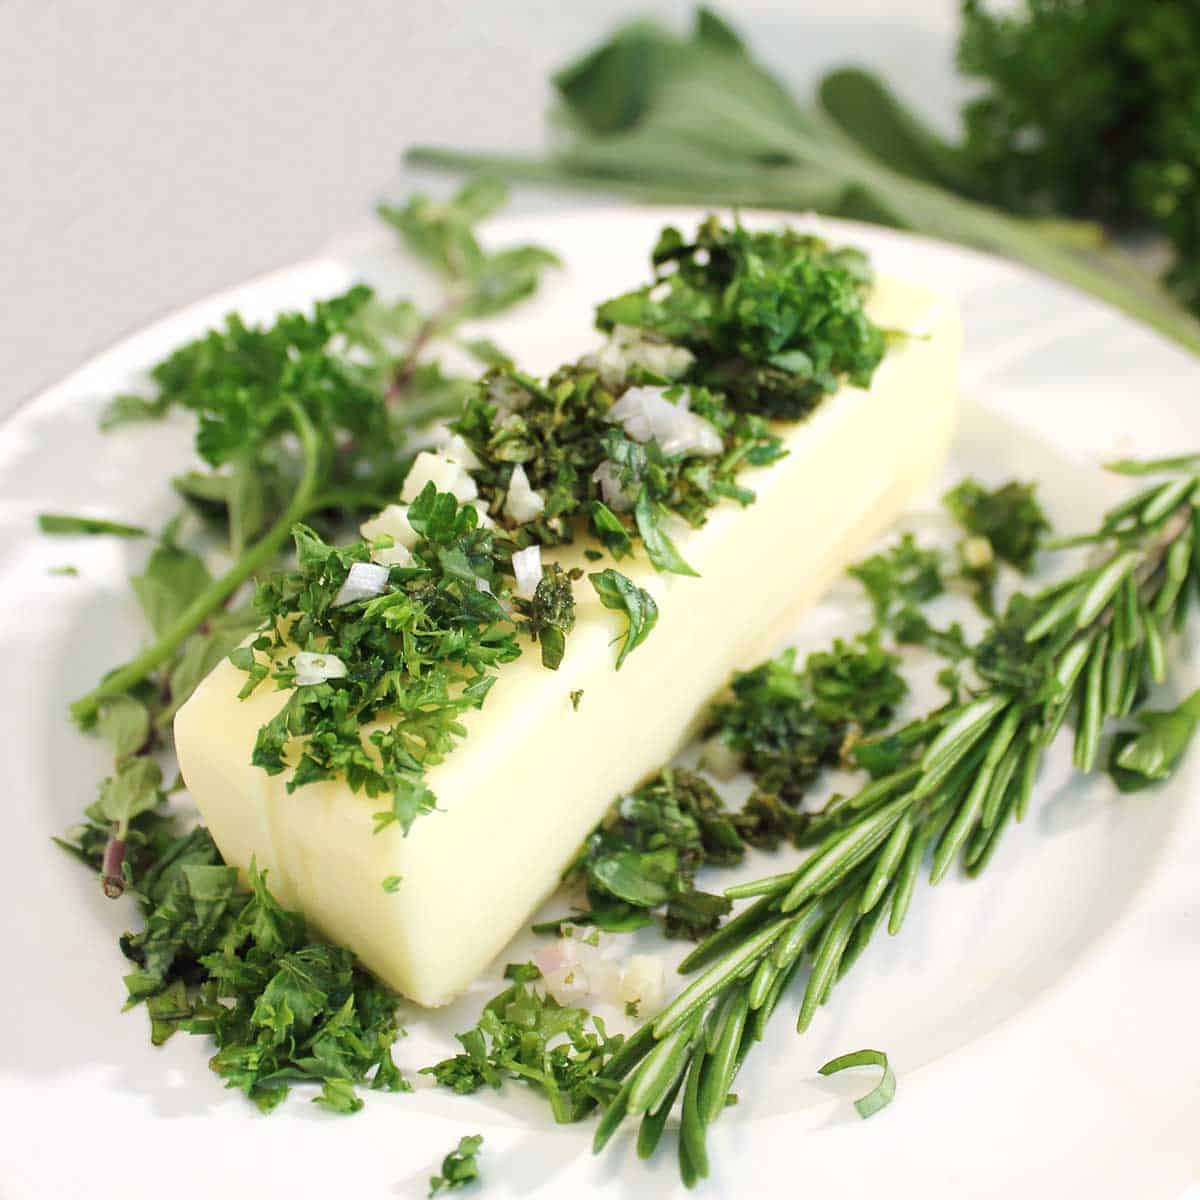 Butter with herbs on top.